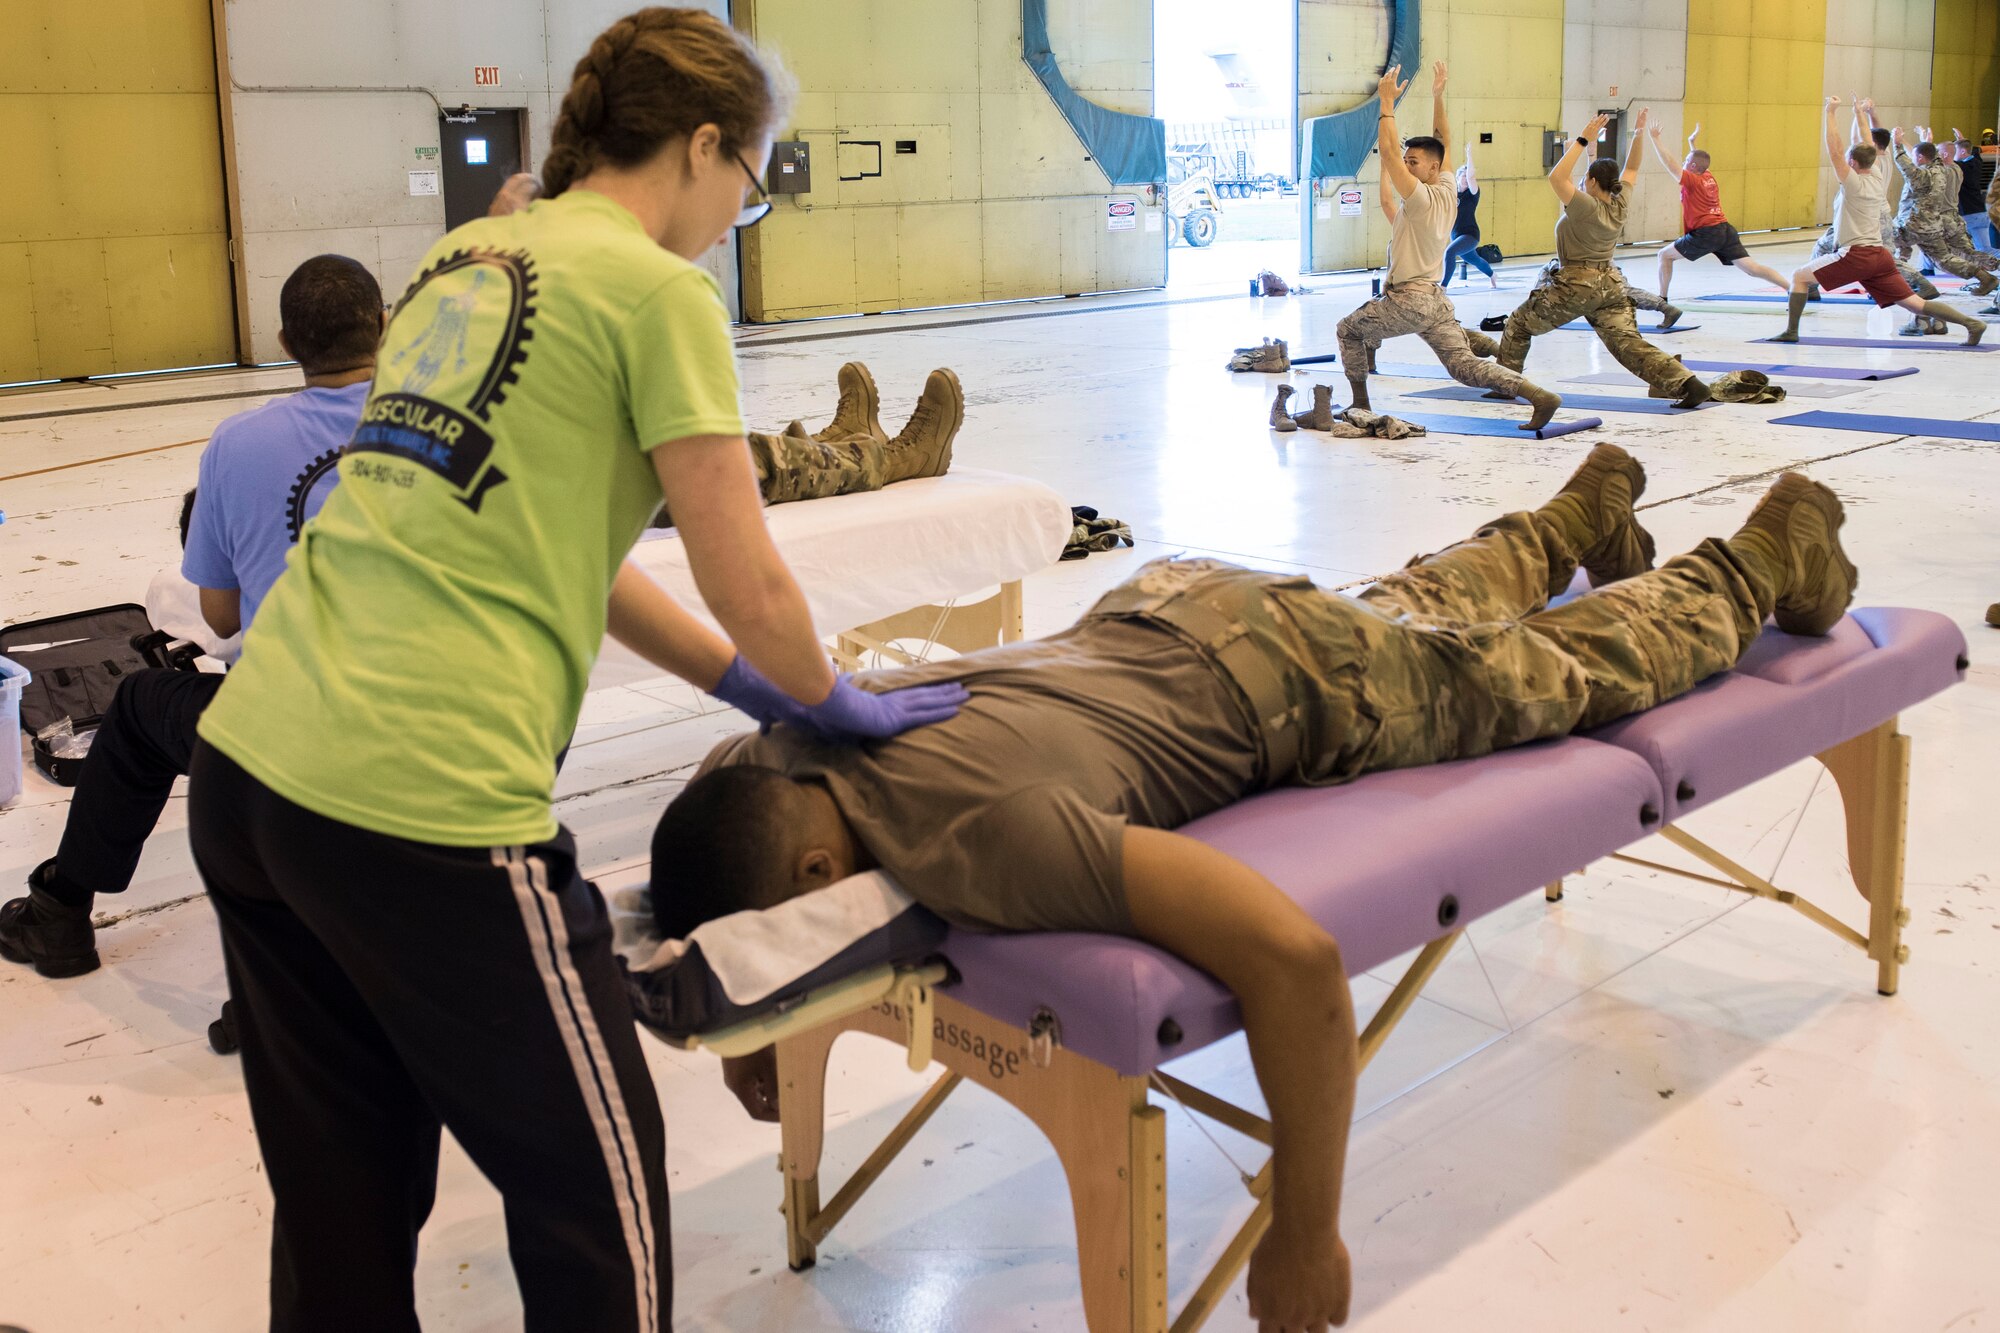 Muscular Skeletal Therapies, Inc., provide massages to Airmen at the 167th Airlift Wing, Oct. 6, 2019, as part of the wing's Full Spectrum Wellness Day. The 167th Airlift Wing paused normal unit training assembly activities for the day to focus on wellness and resilience as part of an Air Force-wide initiative to address a spike in suicides across the force this year. (U.S. Air National Guard photo by Senior Master Sgt. Emily Beightol-Deyerle)